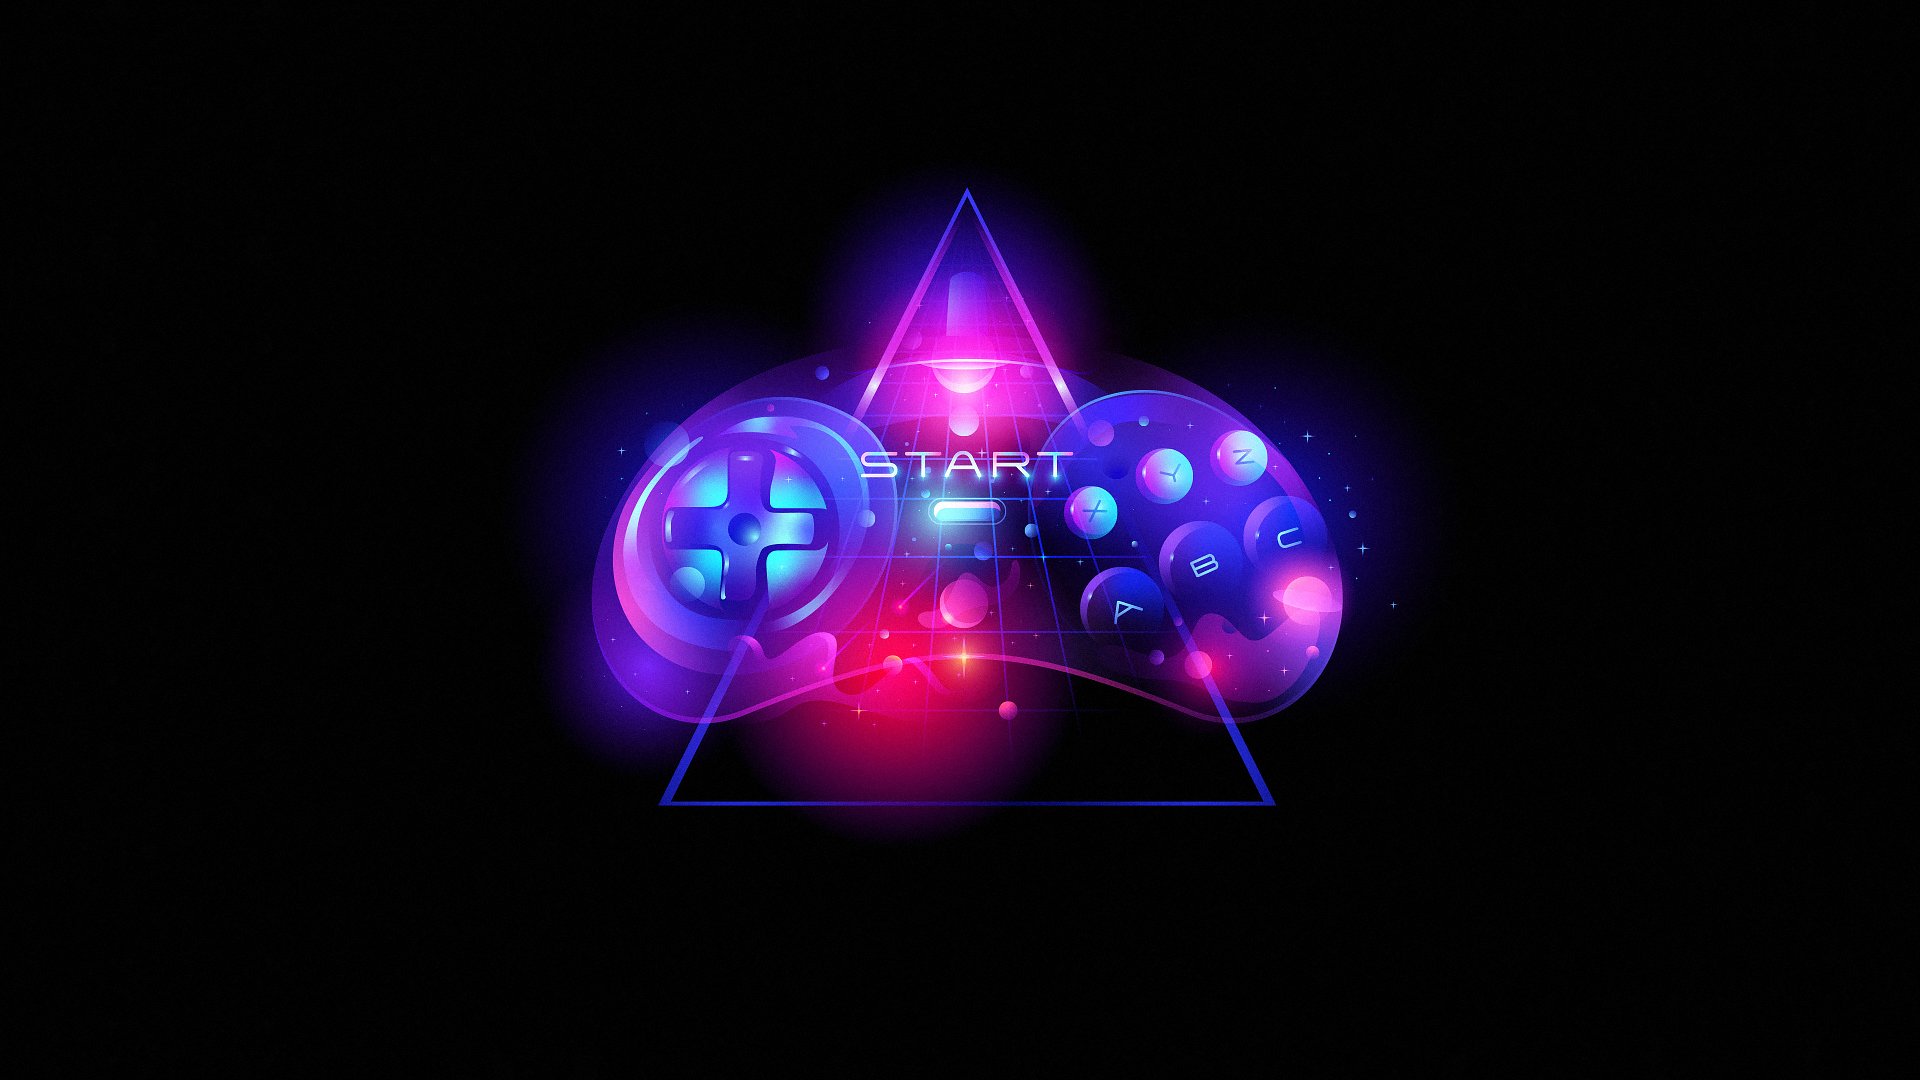 Controller HD Wallpaper and Background